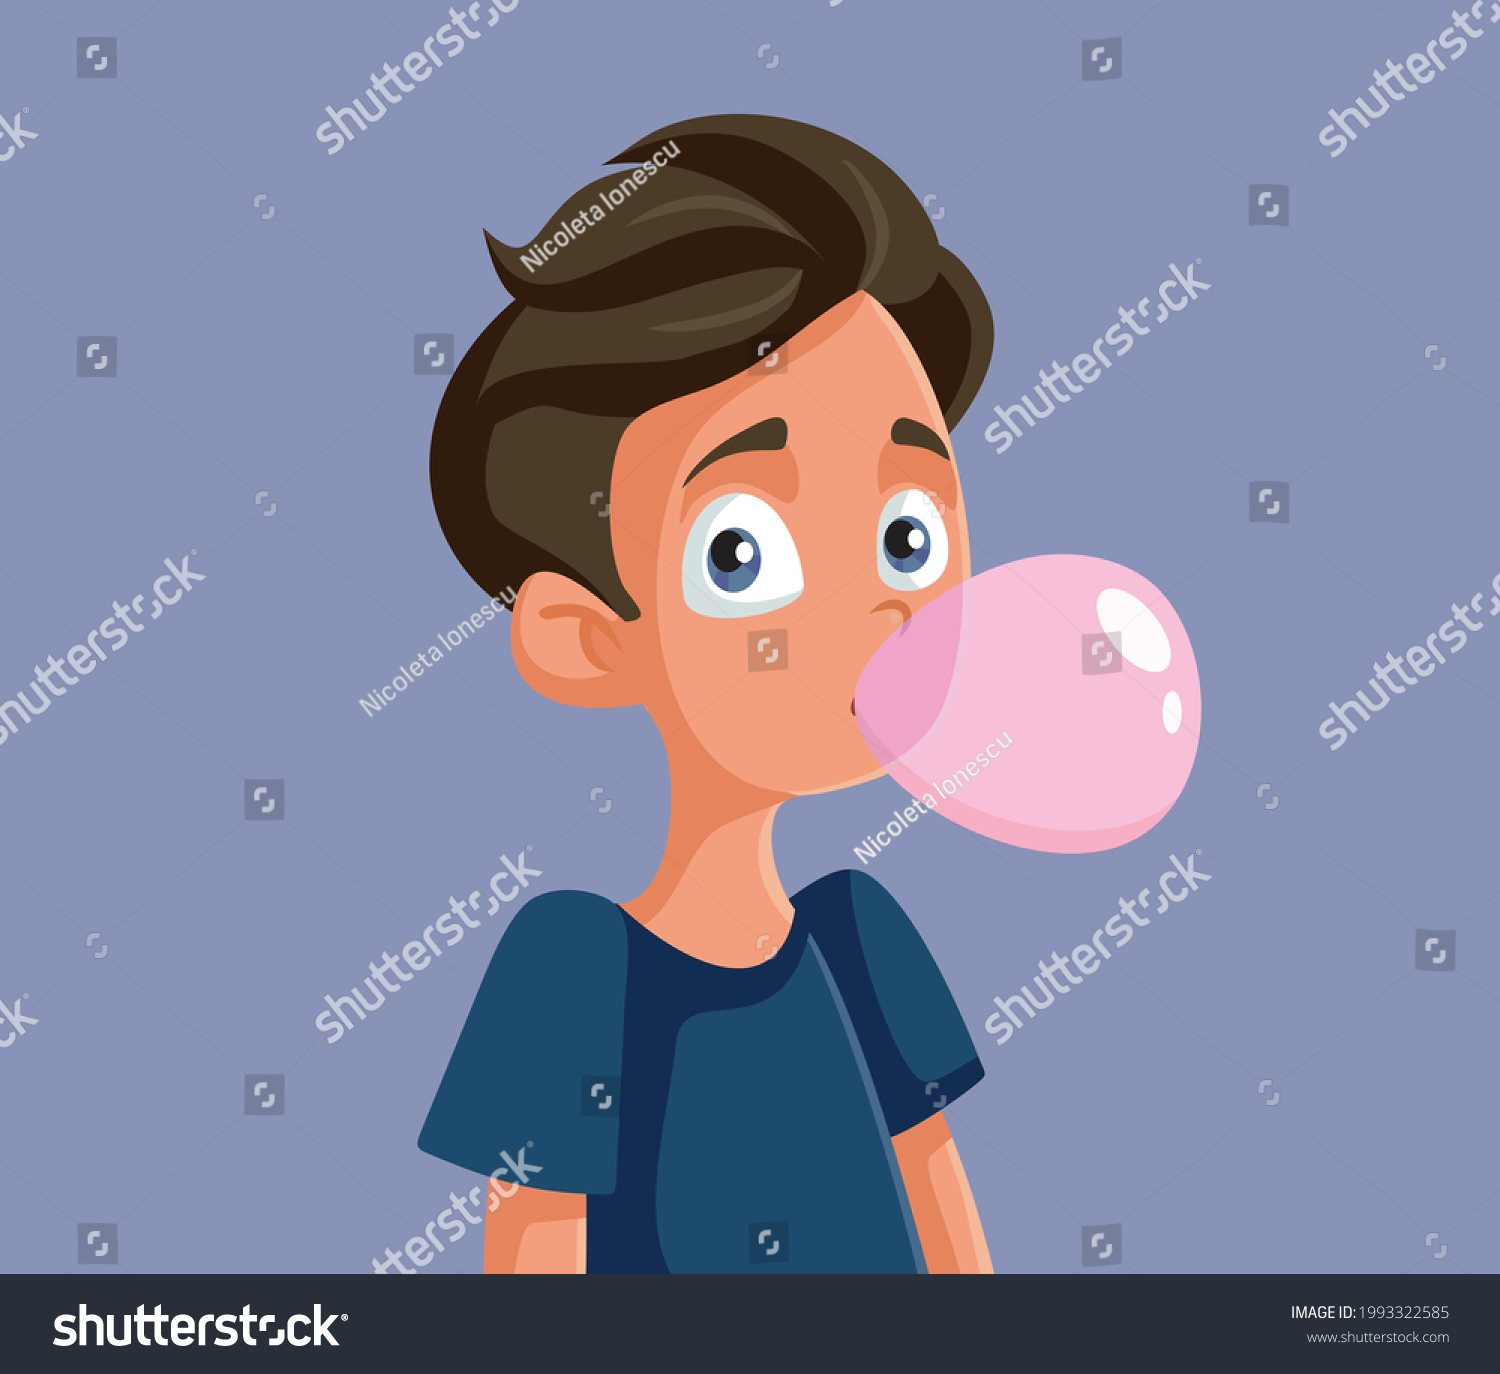 Chewing gum drawing Images, Stock Photos & Vectors | Shutterstock